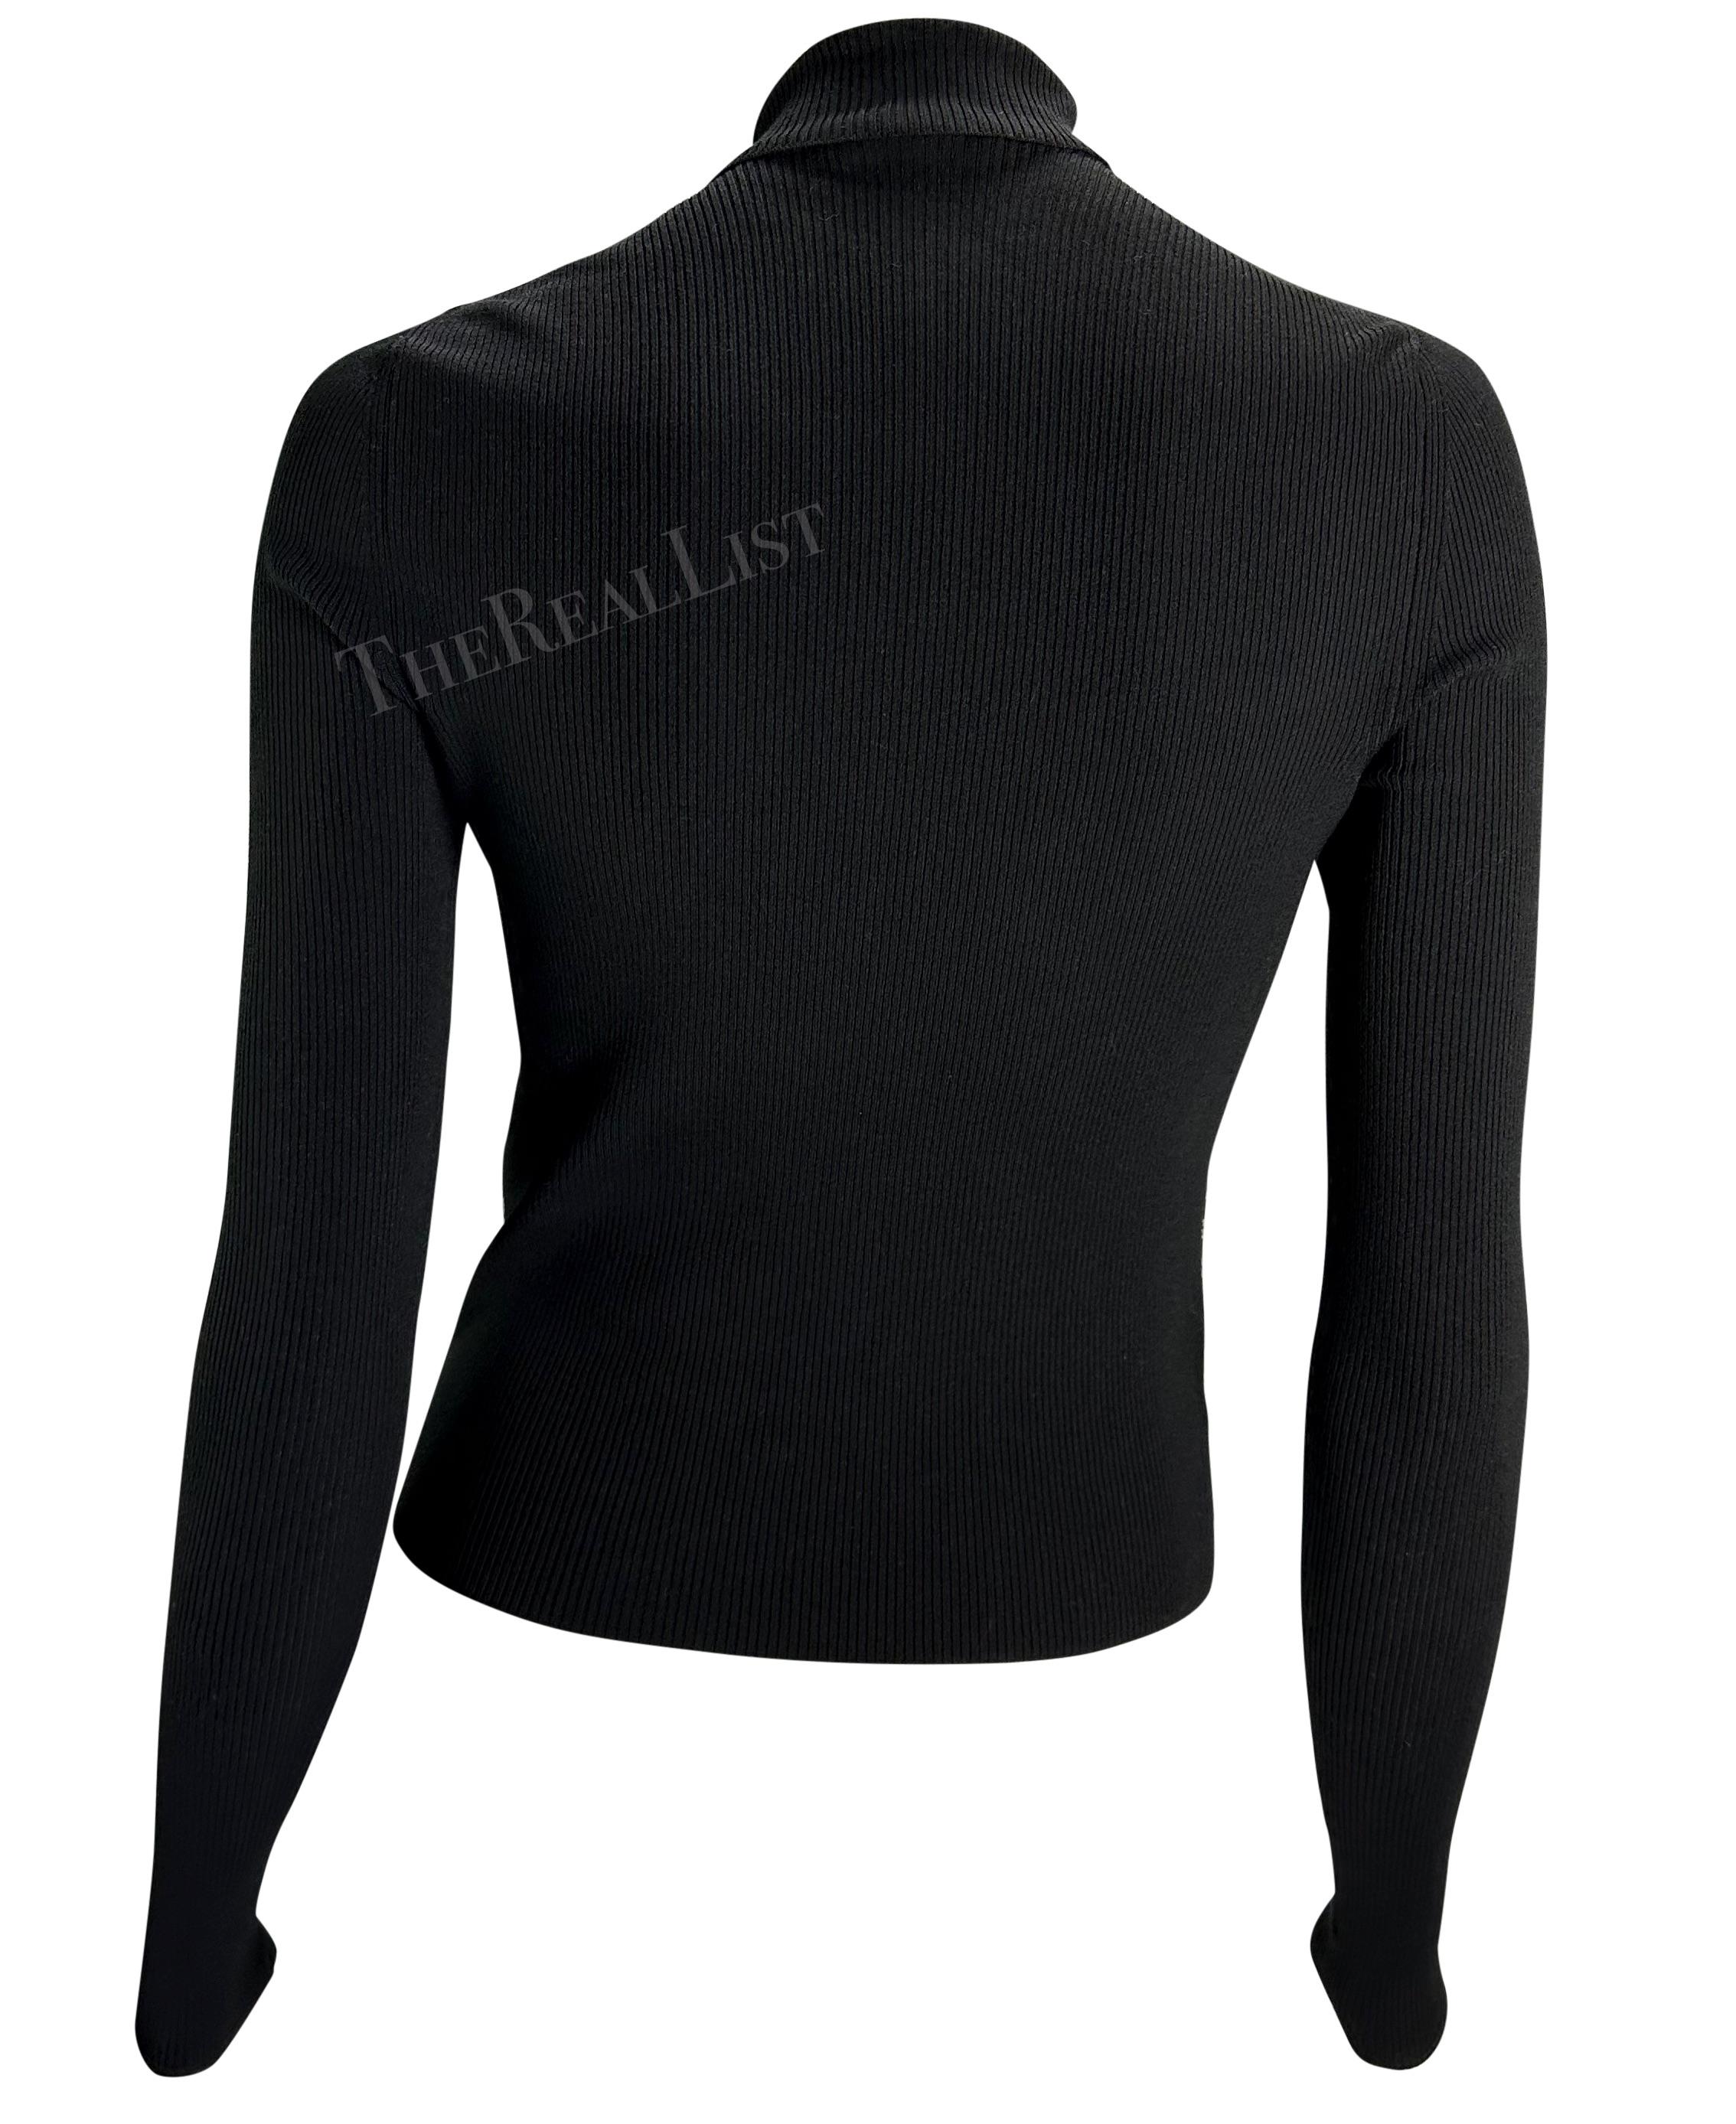 Women's F/W 2000 Gucci by Tom Ford GG Logo Black White Knit Turtleneck Sweater For Sale